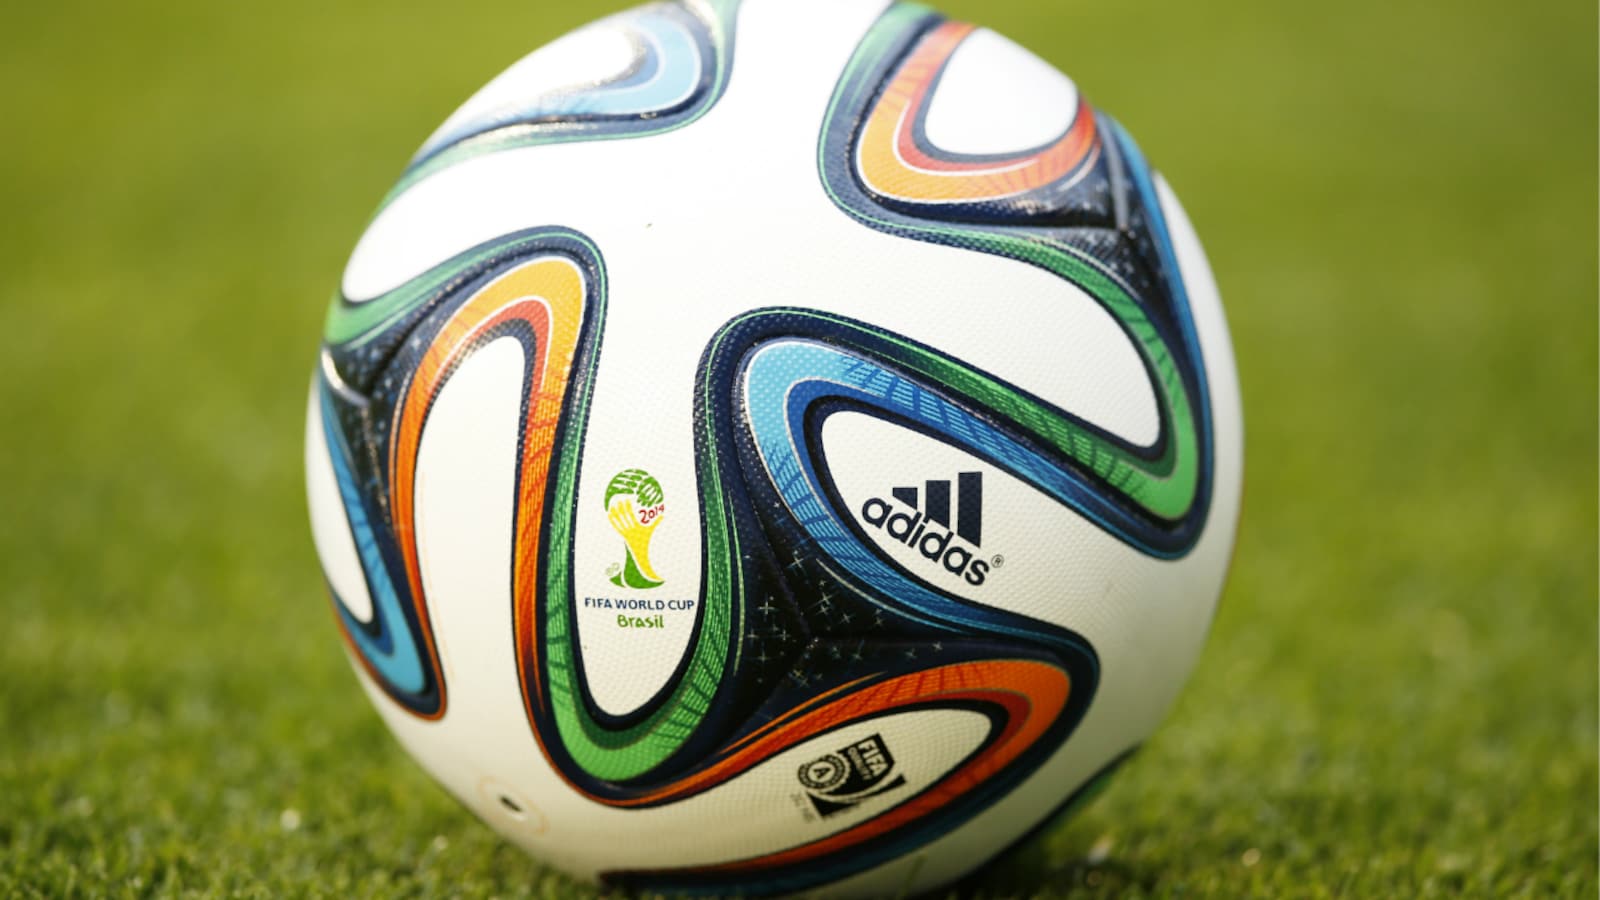 FIFA World Cup 2018: Which is your favourite FIFA World Cup match ball?